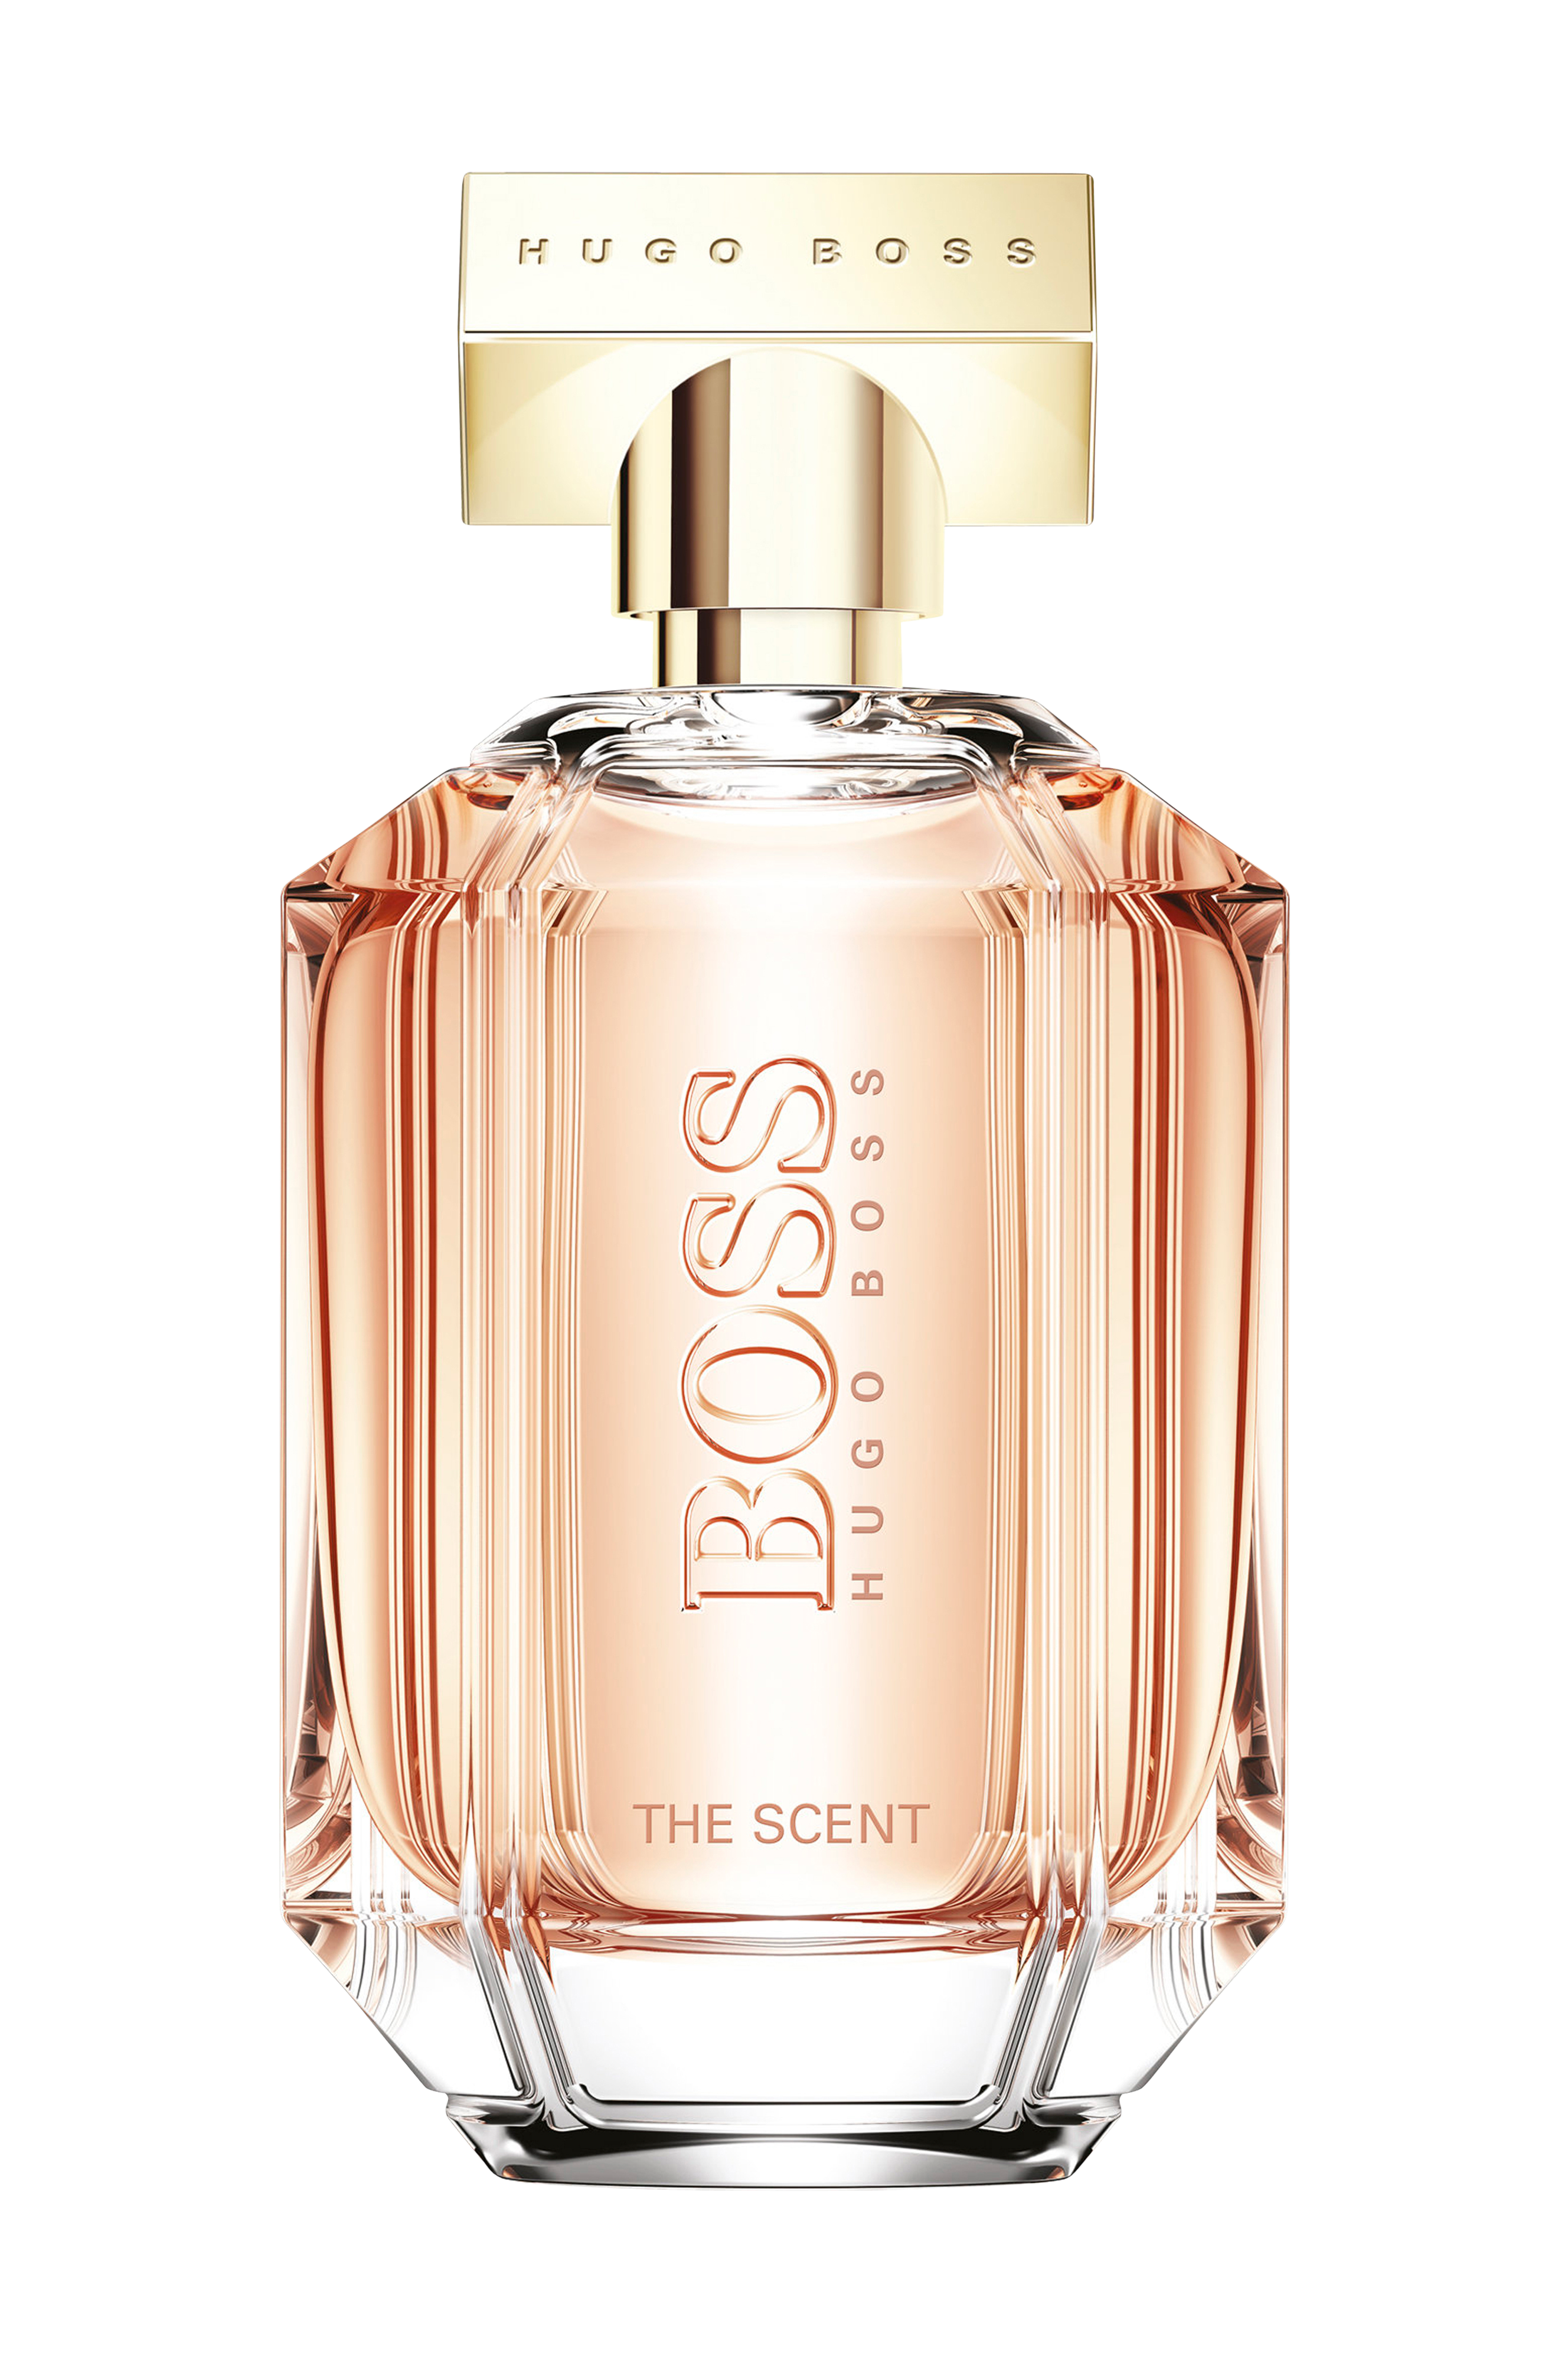 Летуаль хуго босс. Hugo Boss the Scent private Accord for her. Boss Hugo Boss женские the Scent. Туалетная вода Boss the Scent for her, 100 мл. Boss Hugo Boss the Scent Pure Accord.